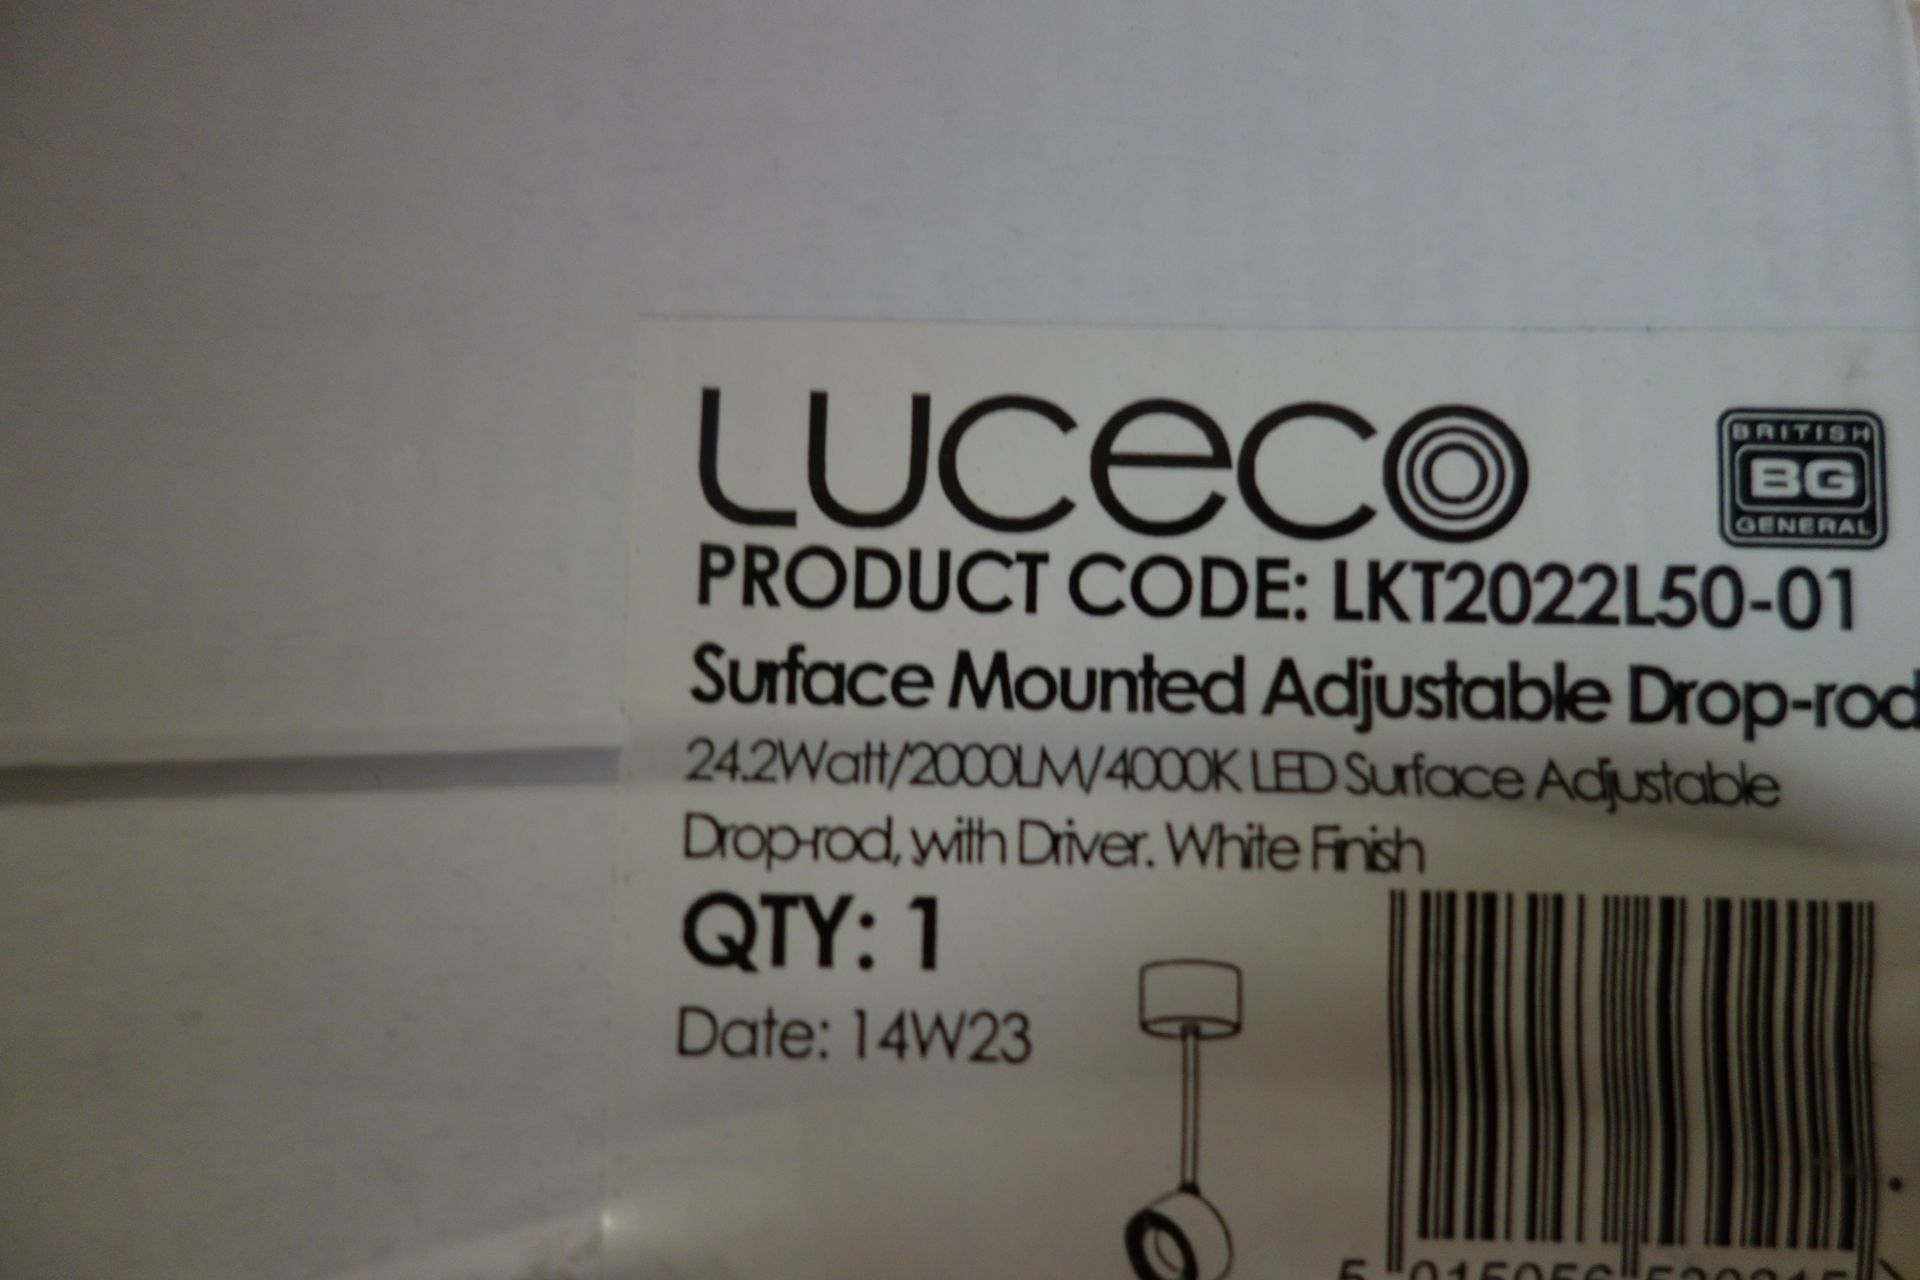 6 X LUCECO LKT2022L50-01 24-2 W LED Surface Adjustable Drop-Rod With Driver White Finish 2000